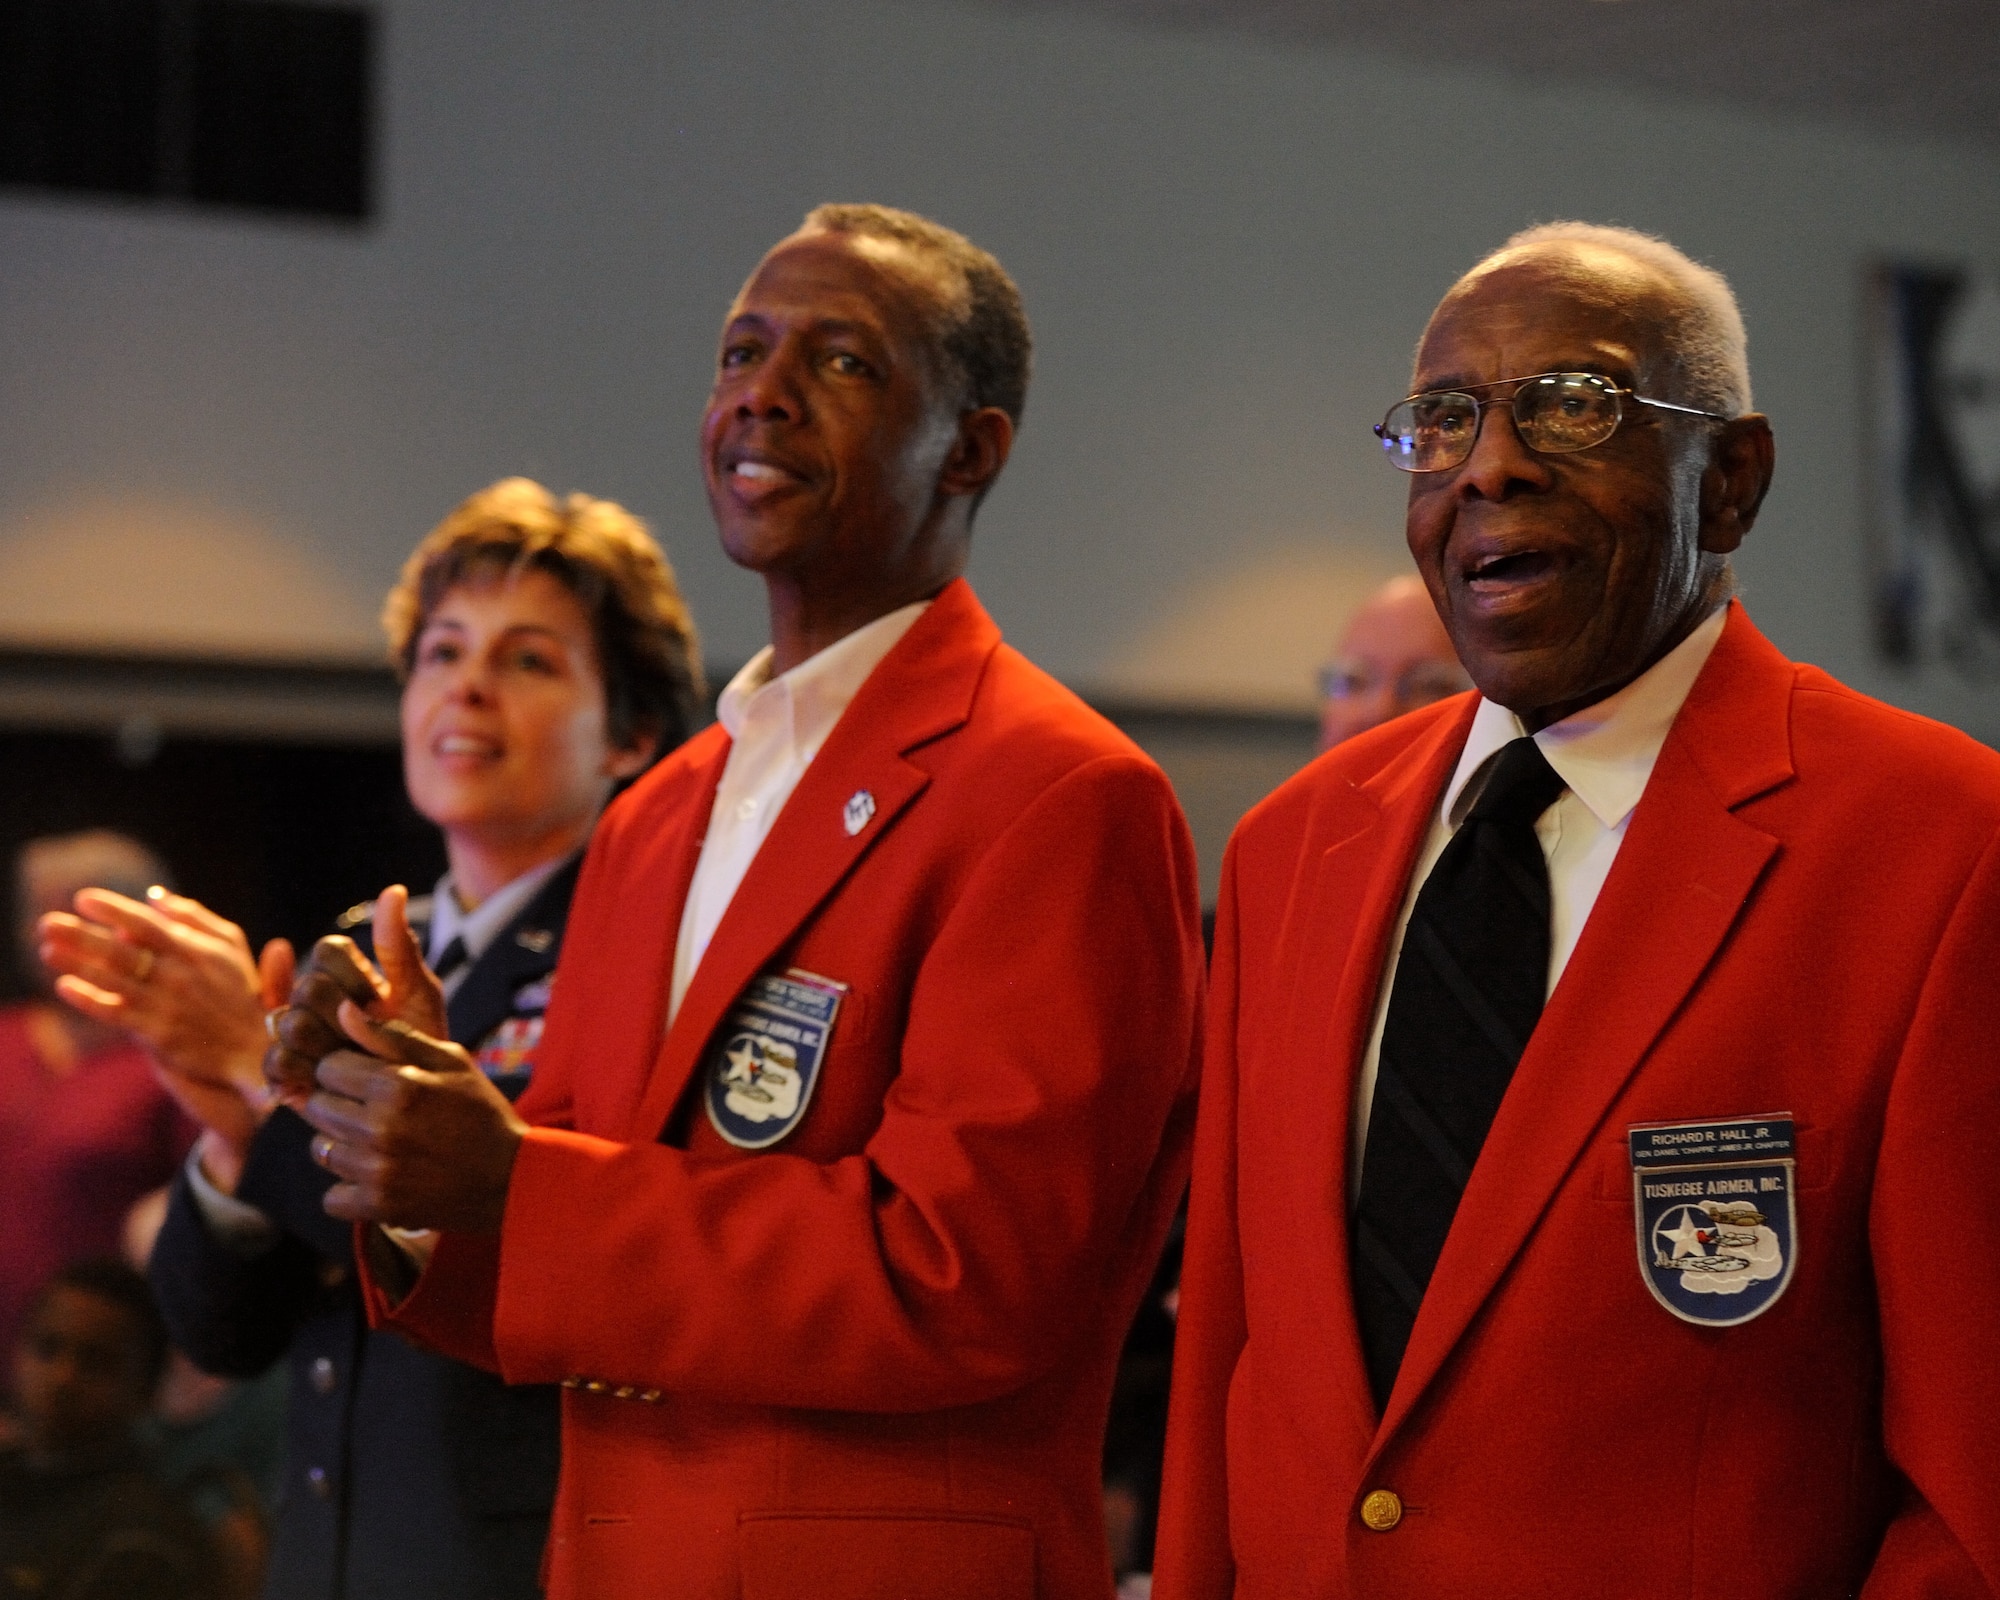 From right, retired U.S. Air Force Chief Master Sgt. Richard R. Hall, Jr., a member of the Tuskegee Airmen, retired U.S. Air Force Lt. Col. Montoria Hubbard, the Tuskegee Airmen Gen. Daniel "Chappie" James chapter president, and U.S. Air Force Col. Gina Humble, 11th Operations Group commander at Joint Base Anacostia-Bolling in Washington, D.C., sing the Air Force song during a concert at The First Academy Faith Hall in Orlando, Fla., Jan. 14, 2011.  The U.S. Air Force Band Ceremonial Brass honored Tuskegee Airmen, the first African American military aviators in the U.S. armed forces, during their performance, playing a new work entitle "Red Tail Skirmish."  U.S. Air Force photo by Master Sgt. Adam M. Stump/Released.